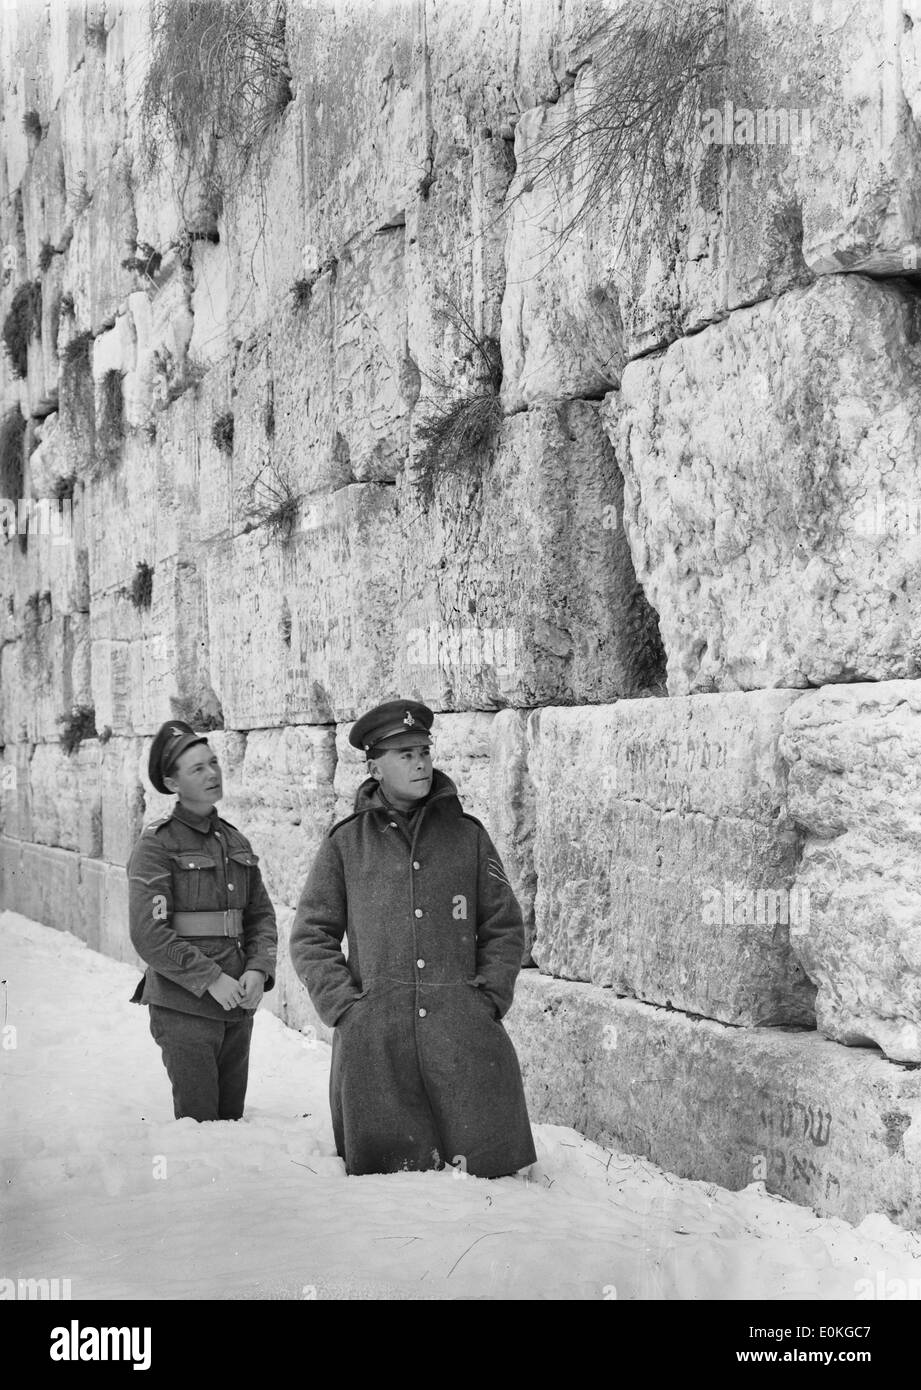 Snow in Jerusalem, 1921. British soldiers next to Wailing Wall Stock Photo